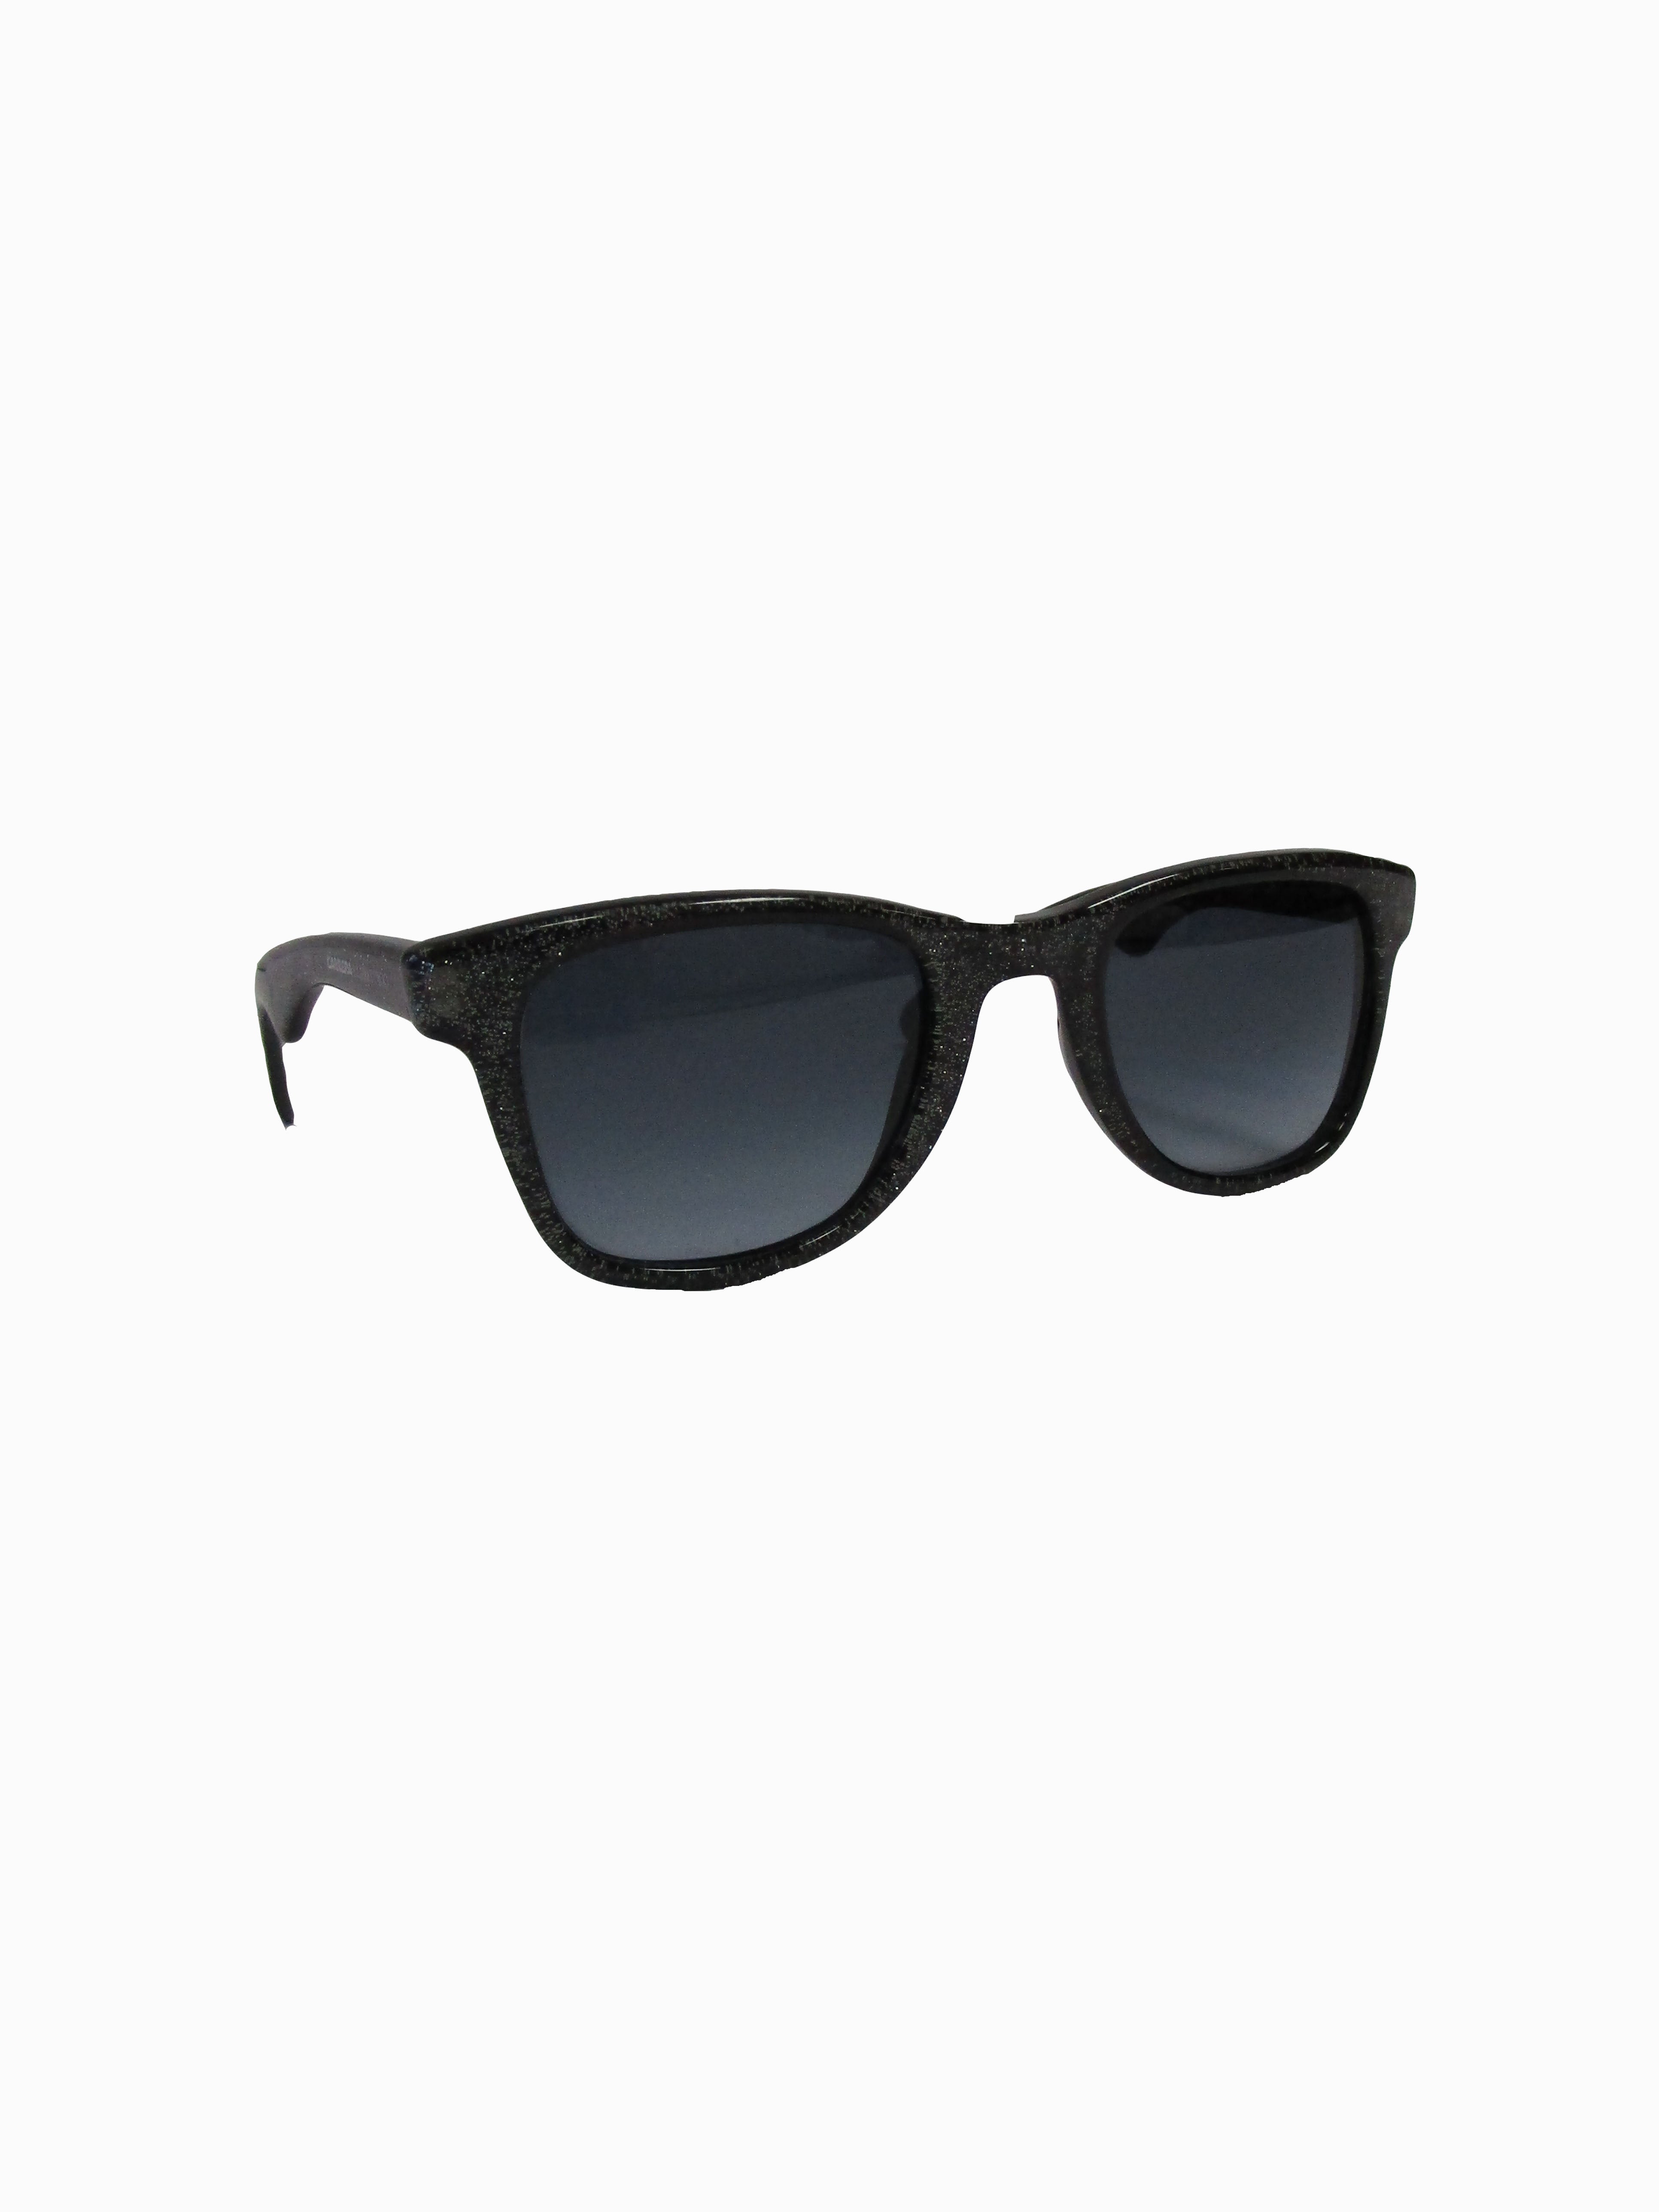 Jimmy Choo for Carrera Black Sparkled Framed Optyl Sunglasses - MRS Couture